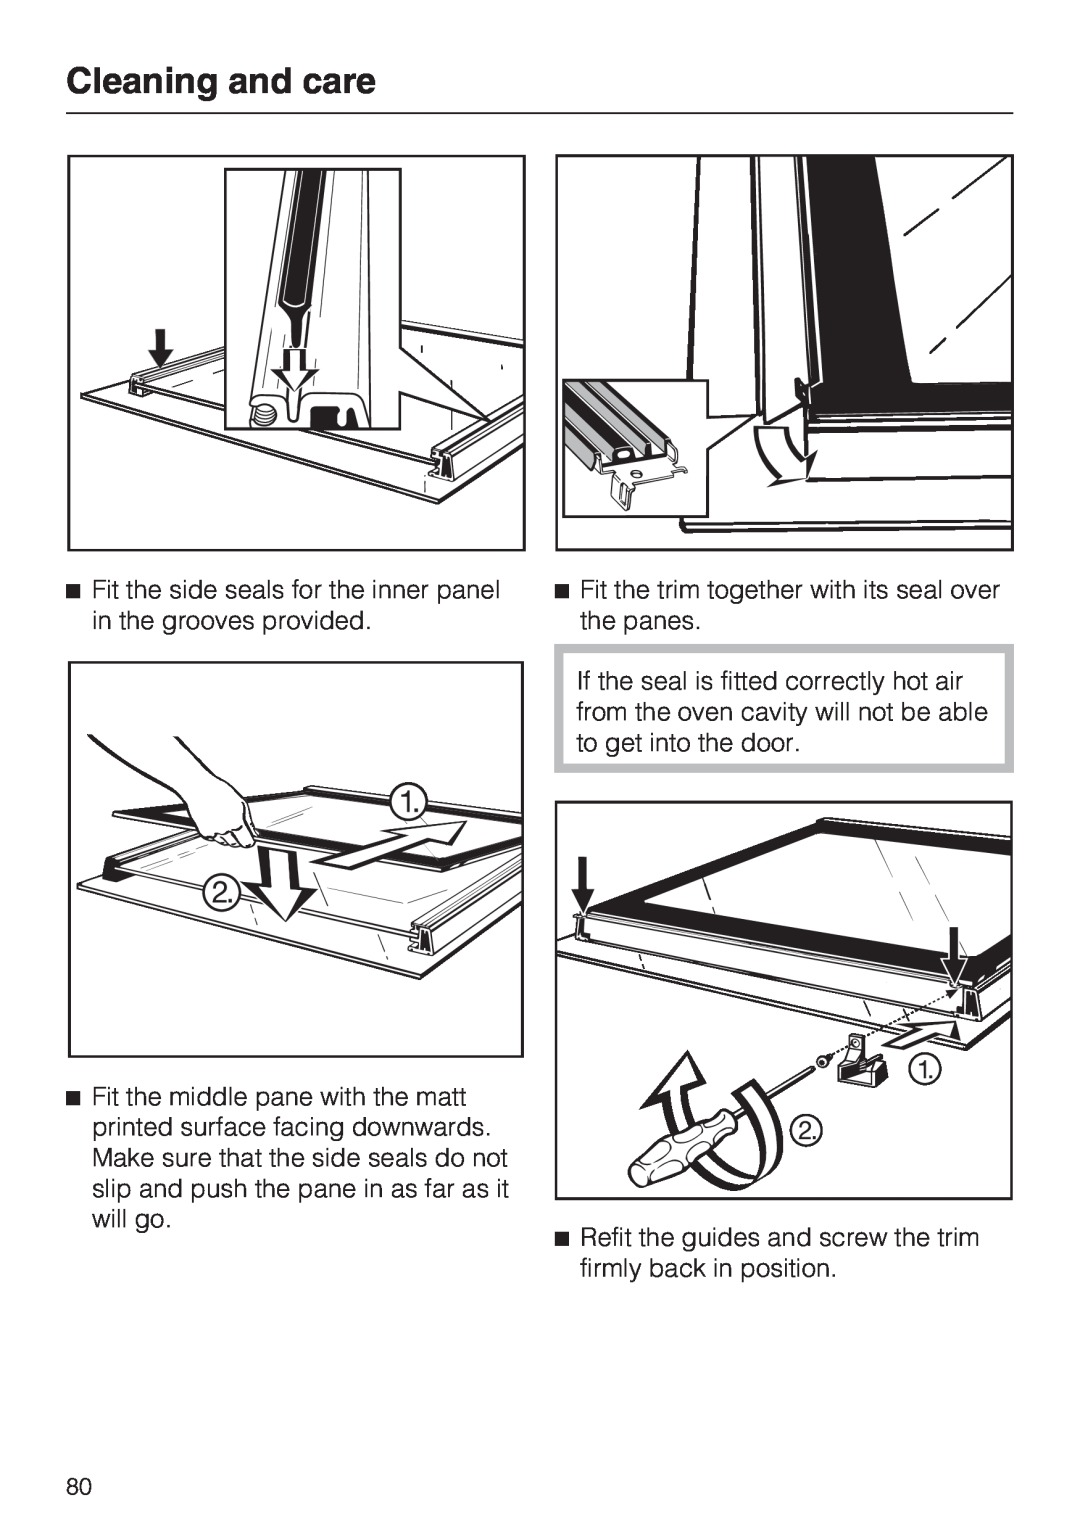 Miele 10 102 470 installation instructions Cleaning and care, Fit the trim together with its seal over the panes 